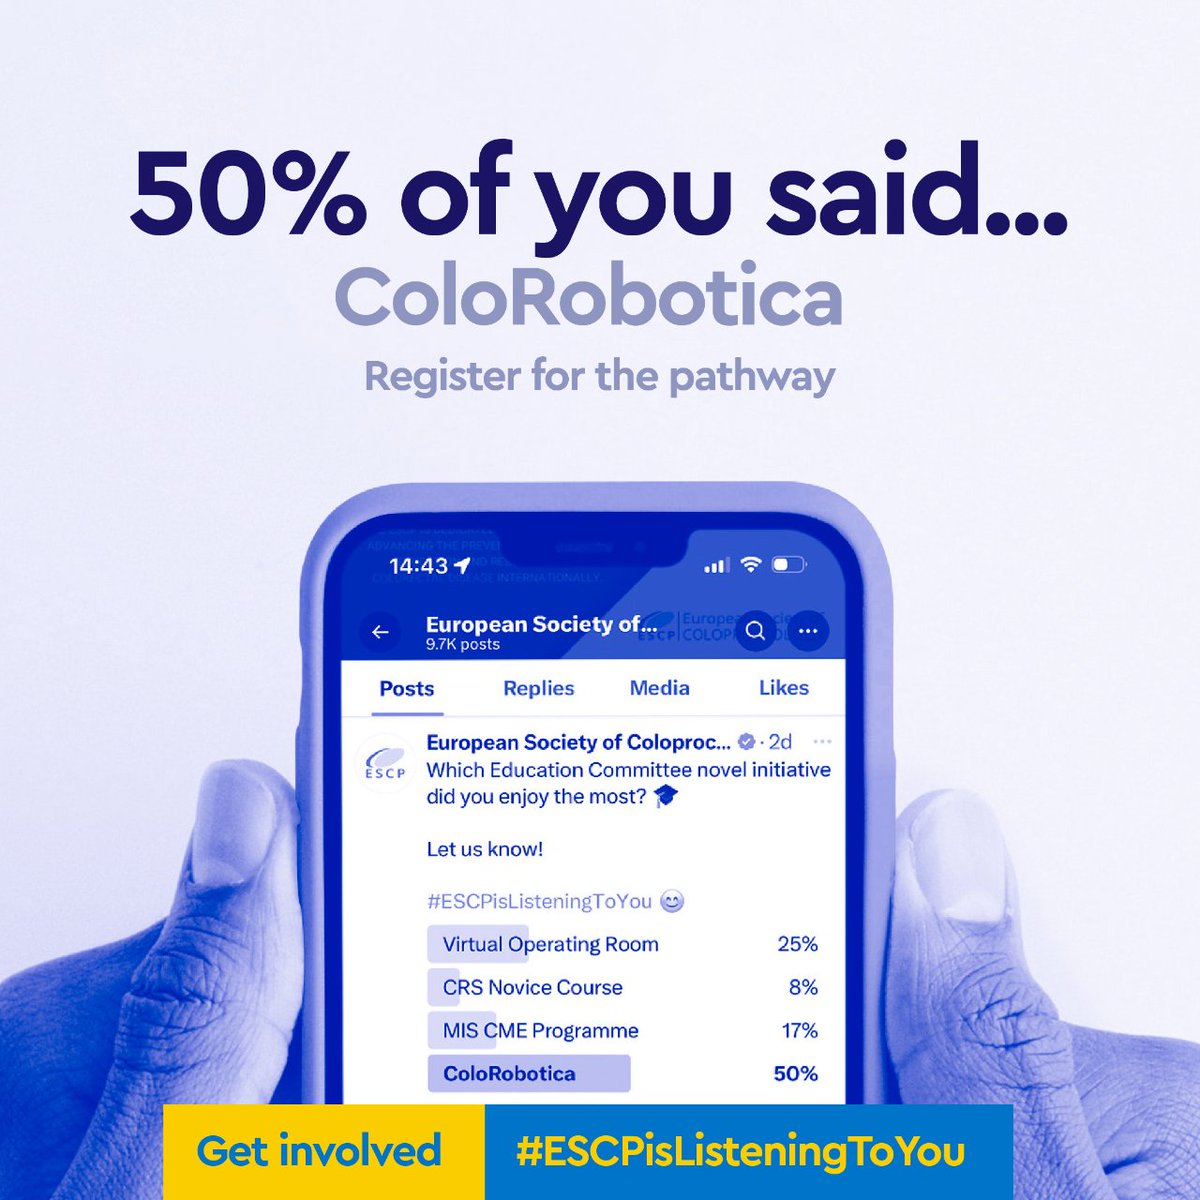 Your votes are in 📊 50% of you said that you enjoyed the ColoRobotica programme the most! Find all you need to know about this initiative and register for the pathway below 👇 i.mtr.cool/jzxtsoipnx #ESCPisListeningToYou